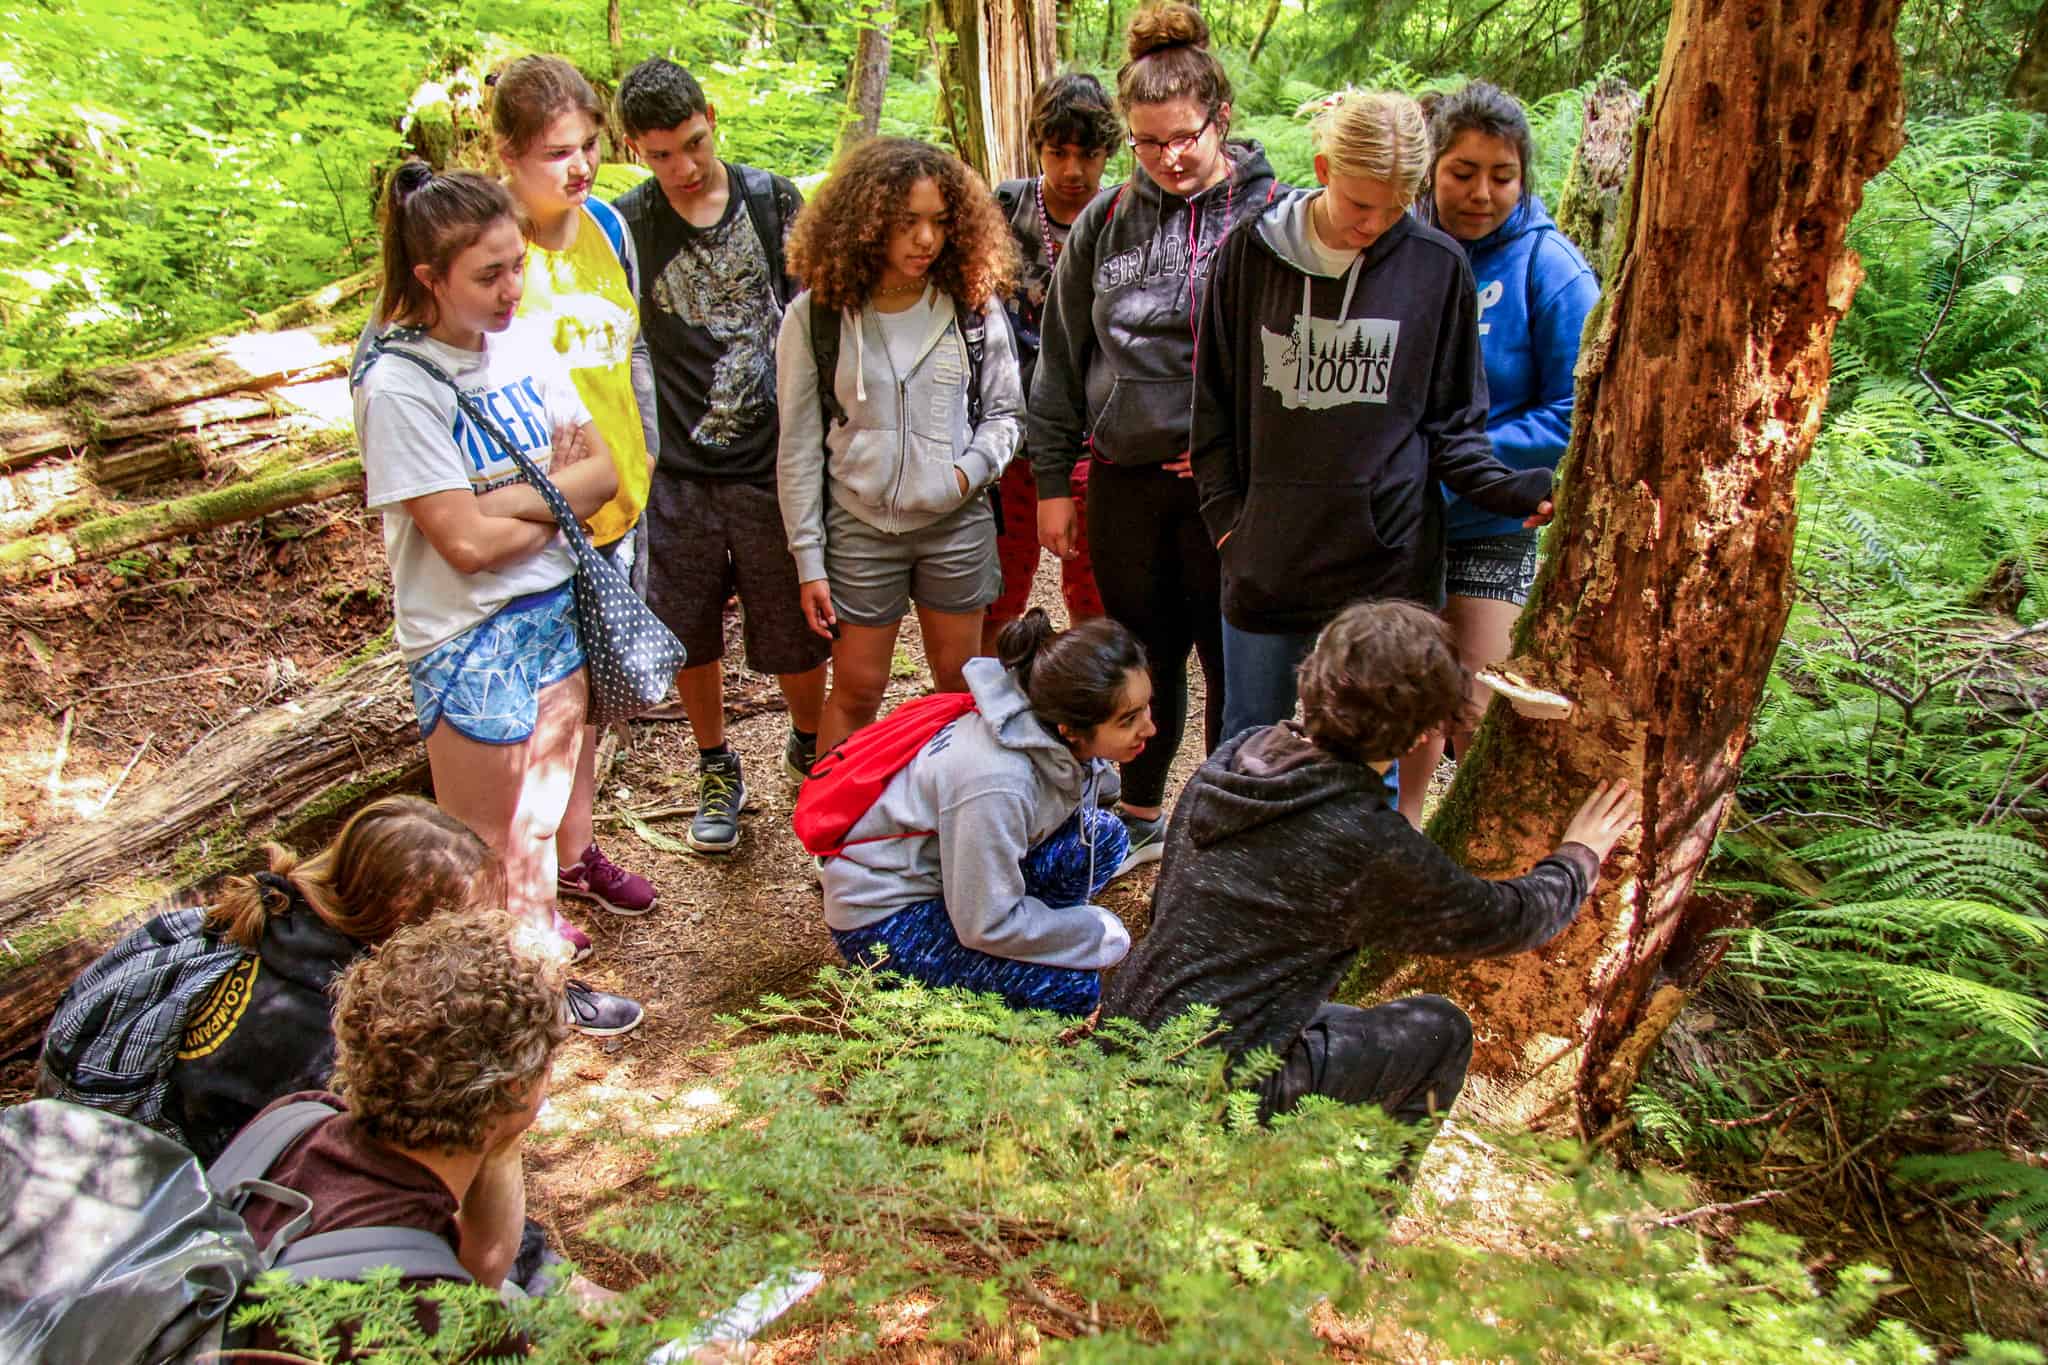 A group of youth observe a mushroom while learning from an instructor